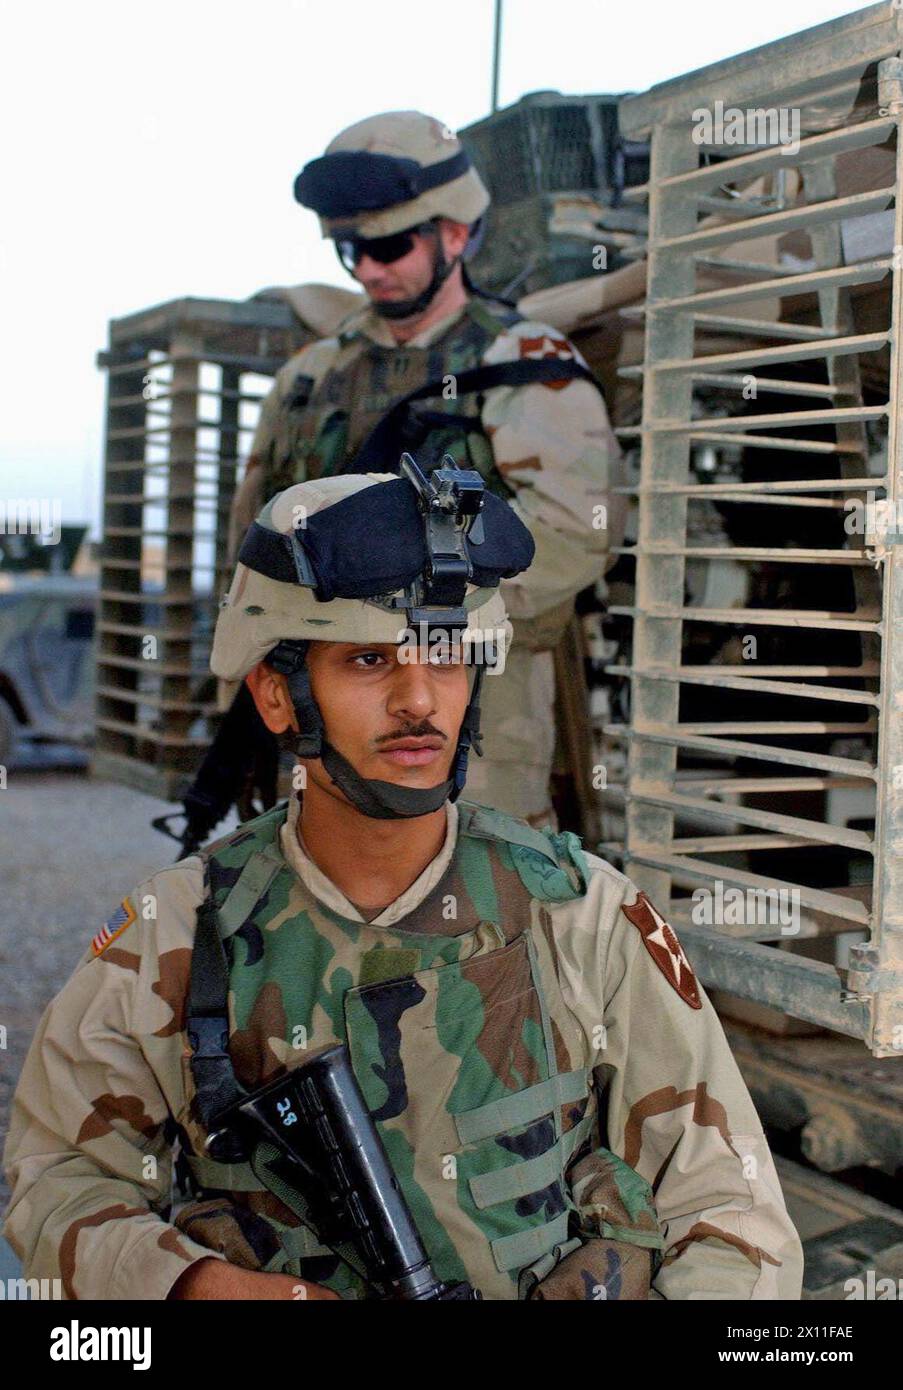 Pfc. Husam Razaq Almusowi (front) and Capt. Matthew Lillibridge exit a Stryker vehicle after returning from a mission where Almusowi translated Lillibridge's conversation to Iraqi Civil Defense Corps soldiers. Almusowi and Lillibridge are Soldiers with the 5th Battalion, 20th Infantry Regiment, 3rd Brigade, 2nd Infantry Division (Stryker Brigade Combat Team) ca. May 29, 2004 Stock Photo